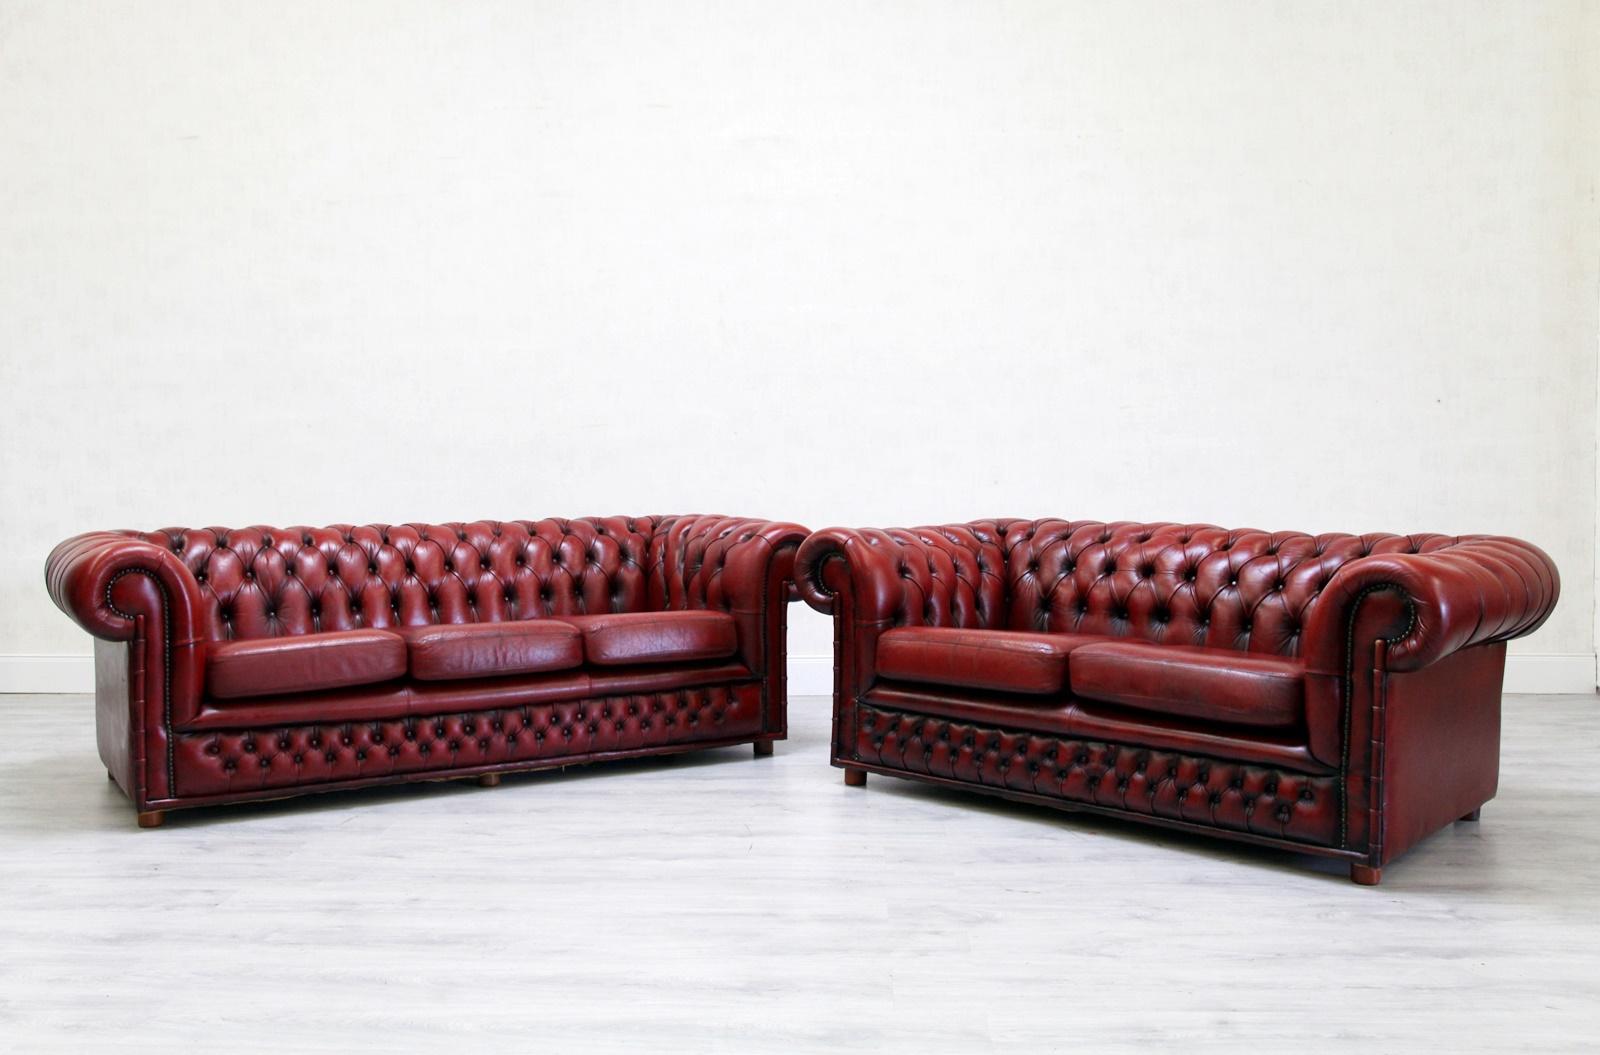 Chesterfield sectional sofa made in England
The shape is Classic
Sofa 3-seat
Measures: Height x 67cm, length x 200cm, depthx90cm
Sofa 2-seat
Height x 67cm, length x 170cm, depth x 90cm
Color: Oxblood / Red
Cushion: foam
Condition: The set is